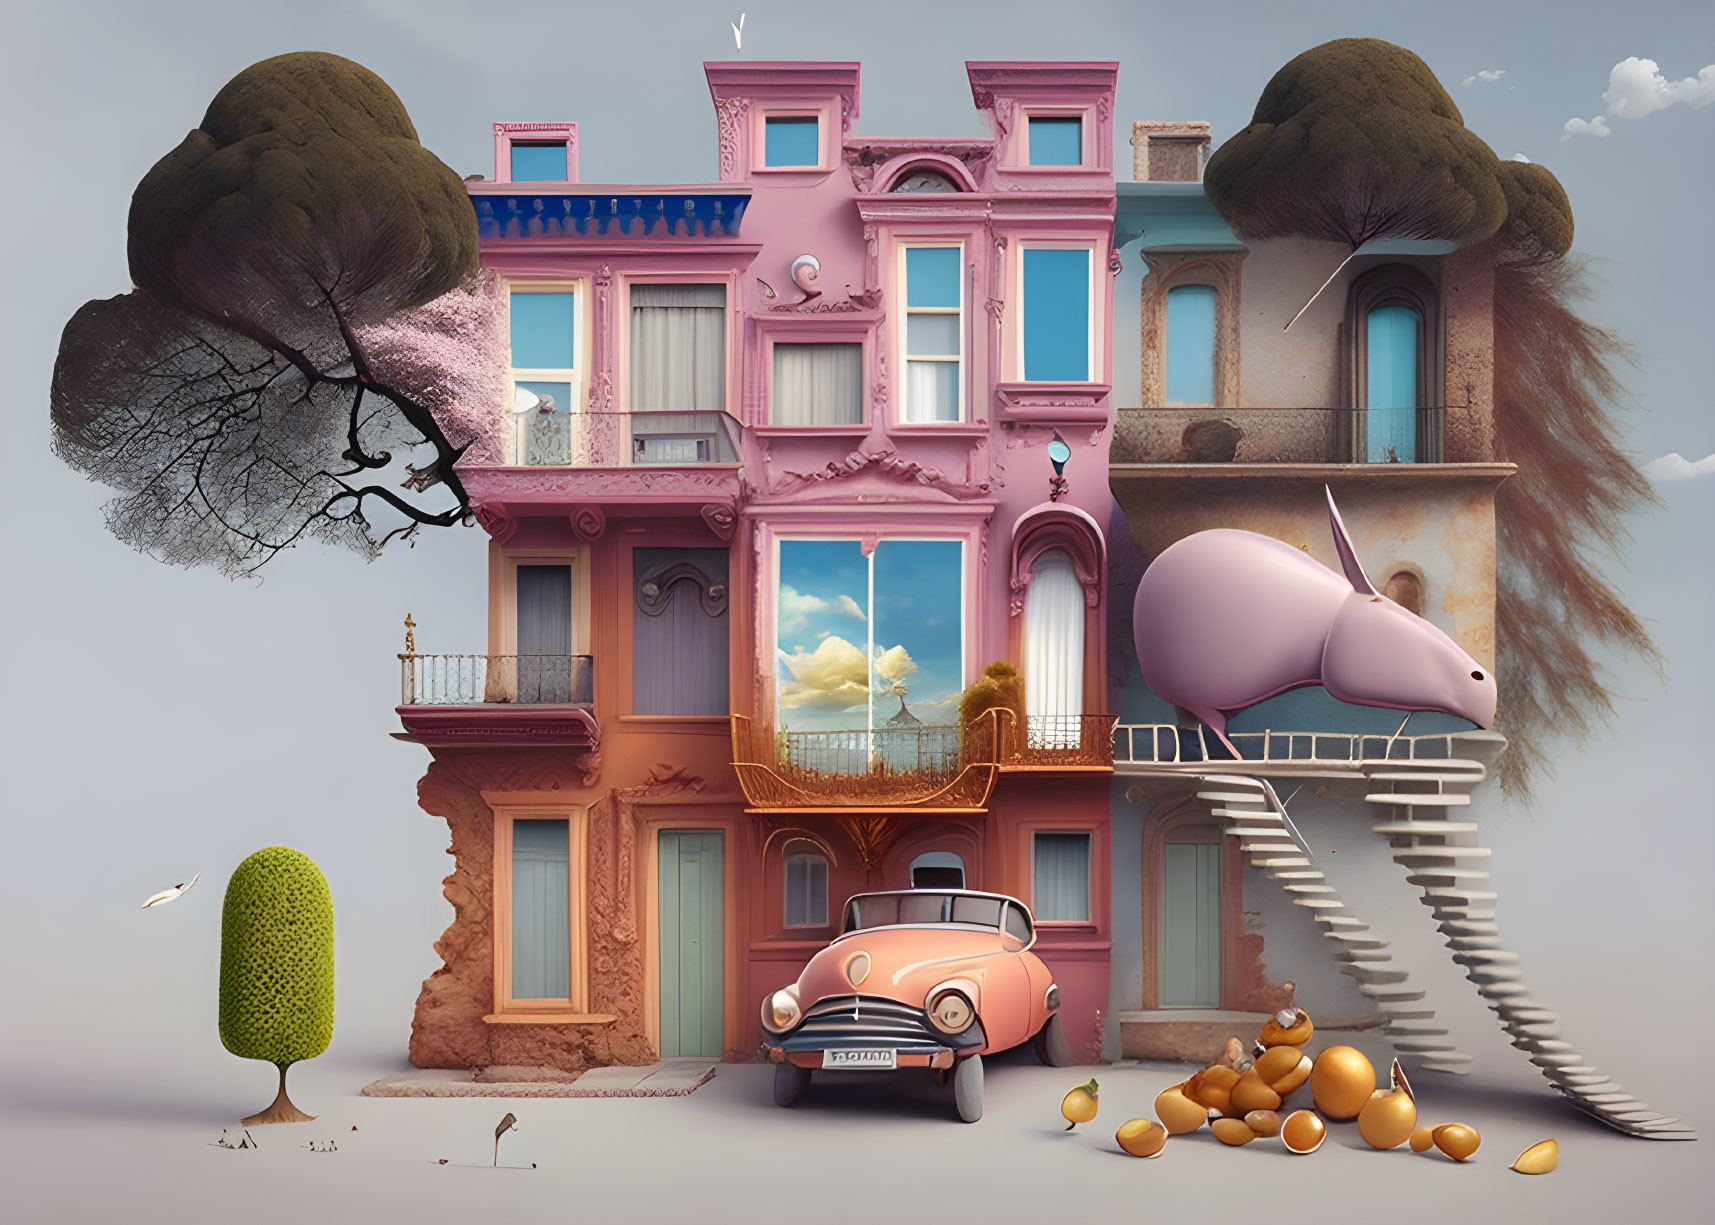 Surreal pink building with tree-shaped clouds, snail, car, and golden eggs